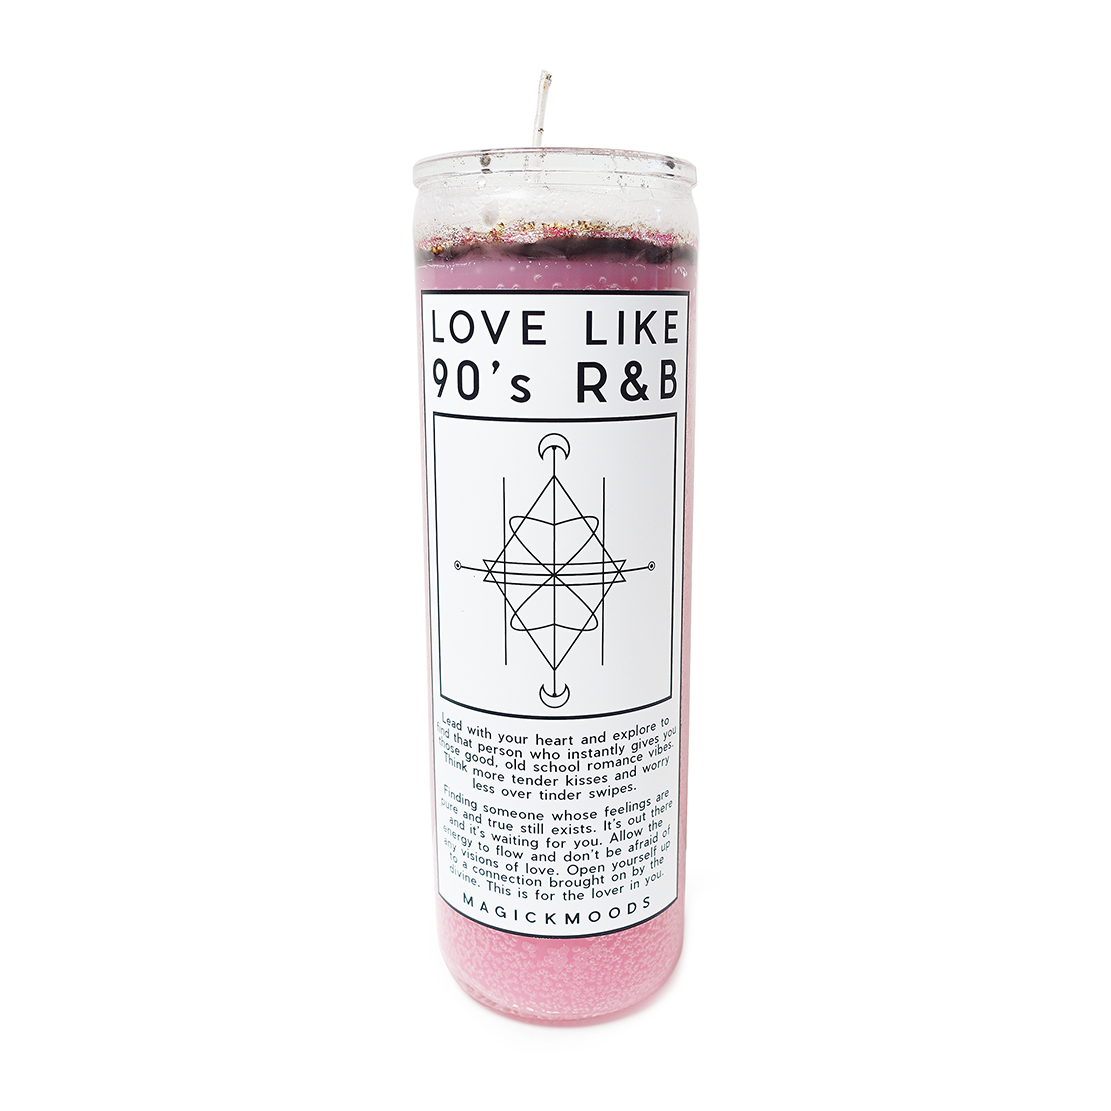 Love Like 90's R&B 7-Day Meditation Candle - PREORDER - Ships by Feb 26th, 2024